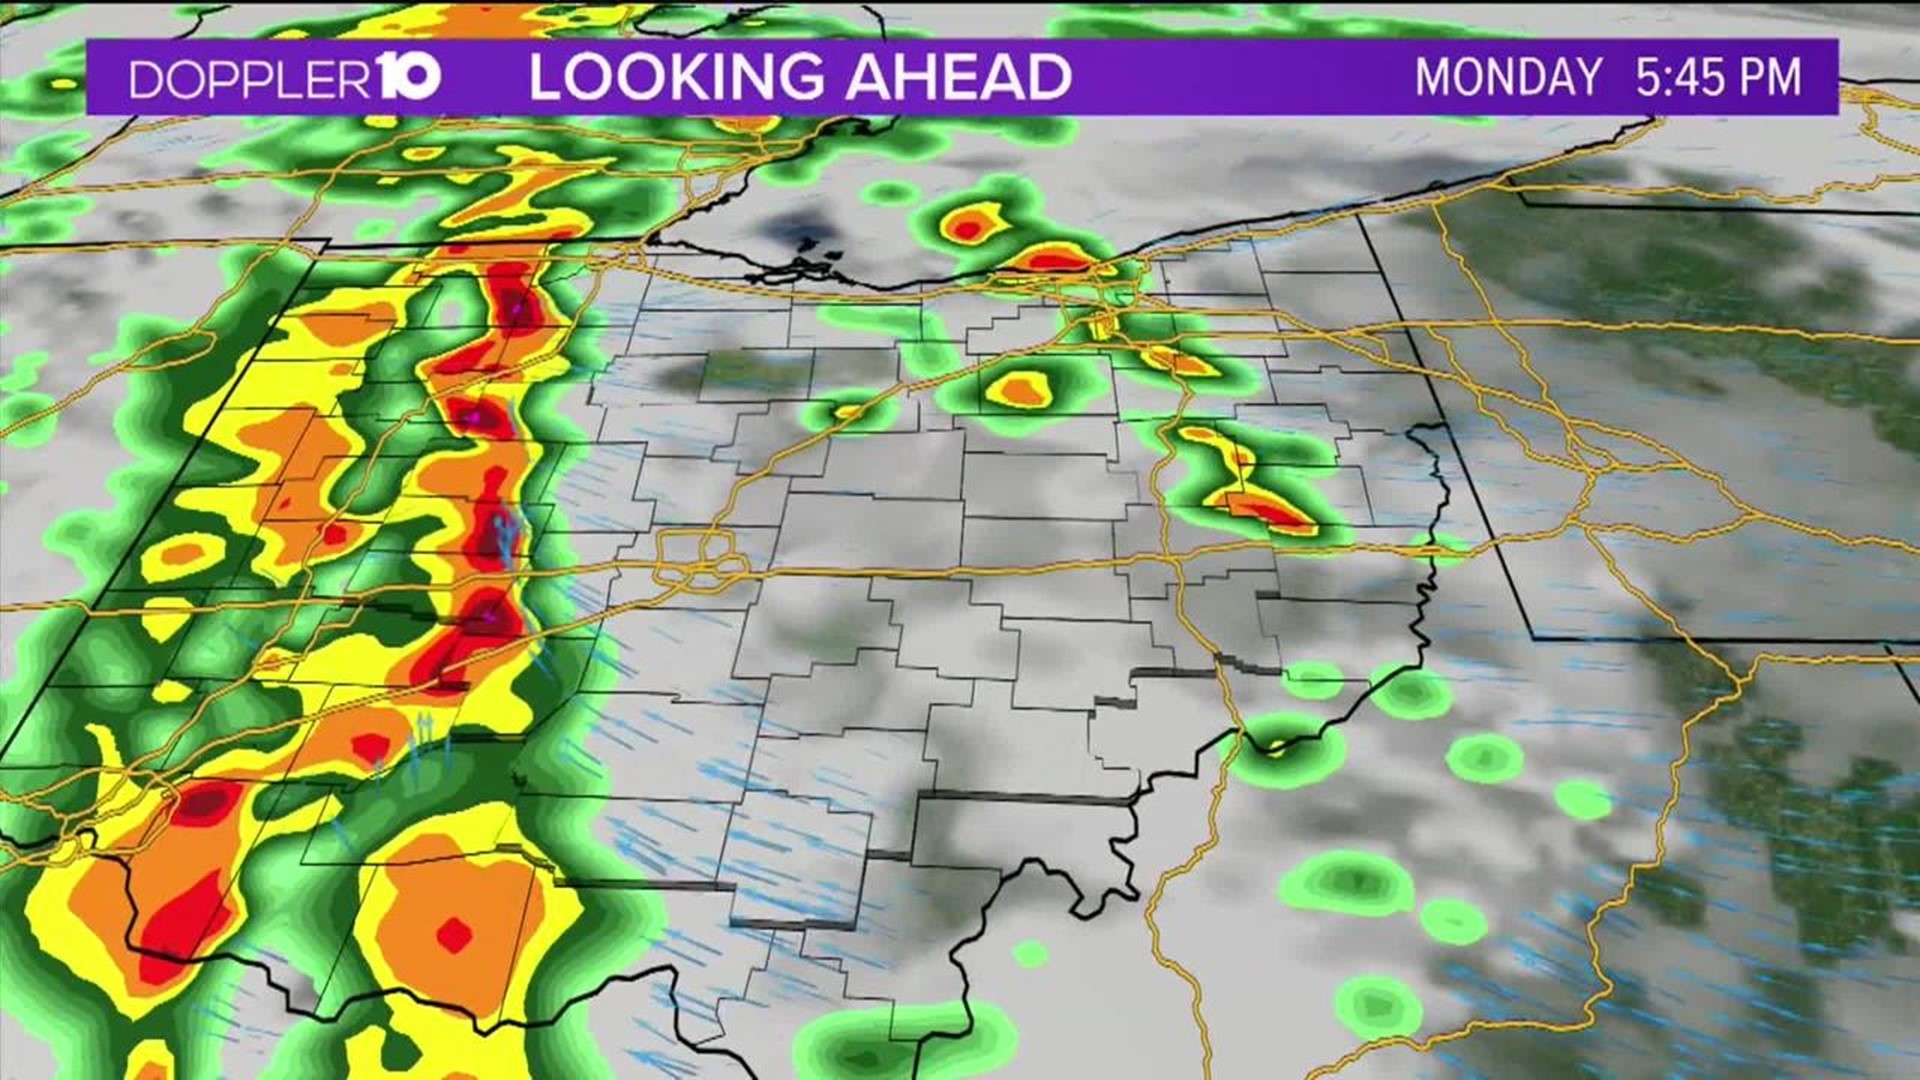 Monday evening weather, May 18, 2020